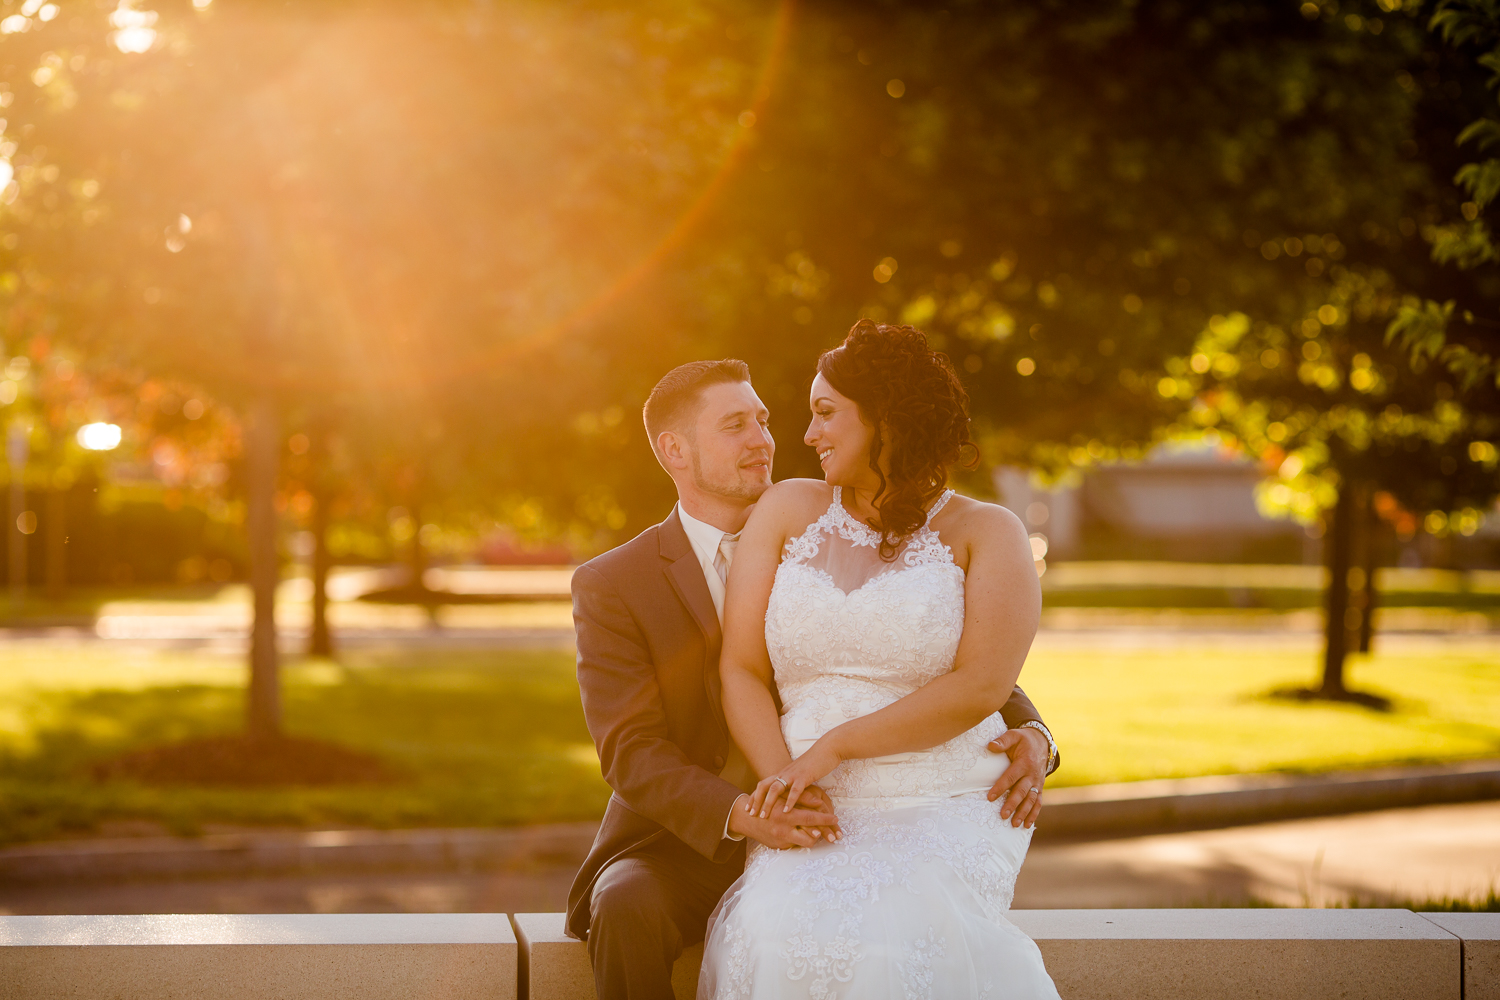  Bride and groom look at each other sweetly. There is sun flare in the image. The bride is sitting on the grooms lap. 